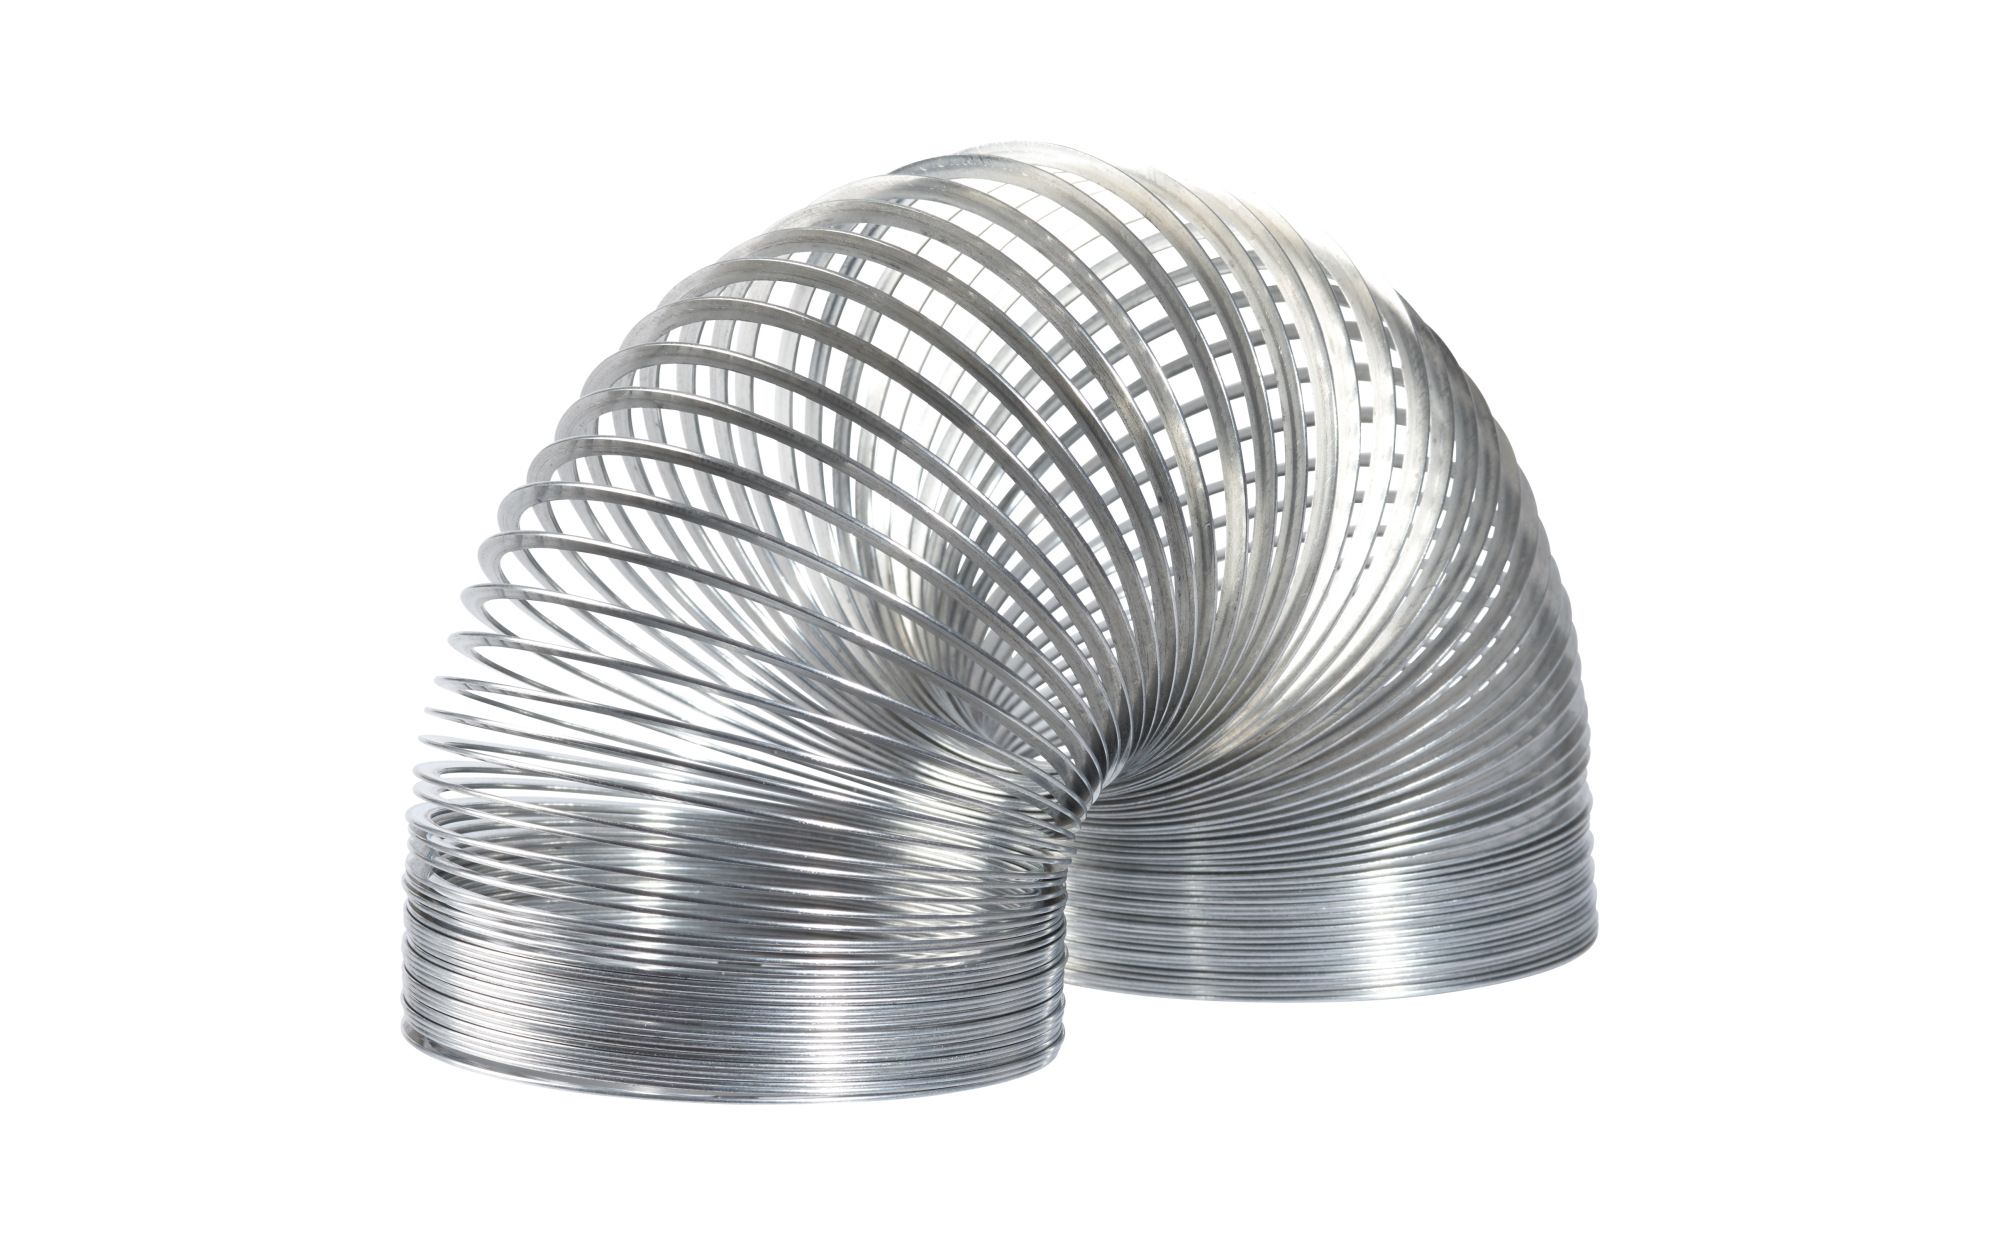 Springy / Slinky (Large Metal) - From